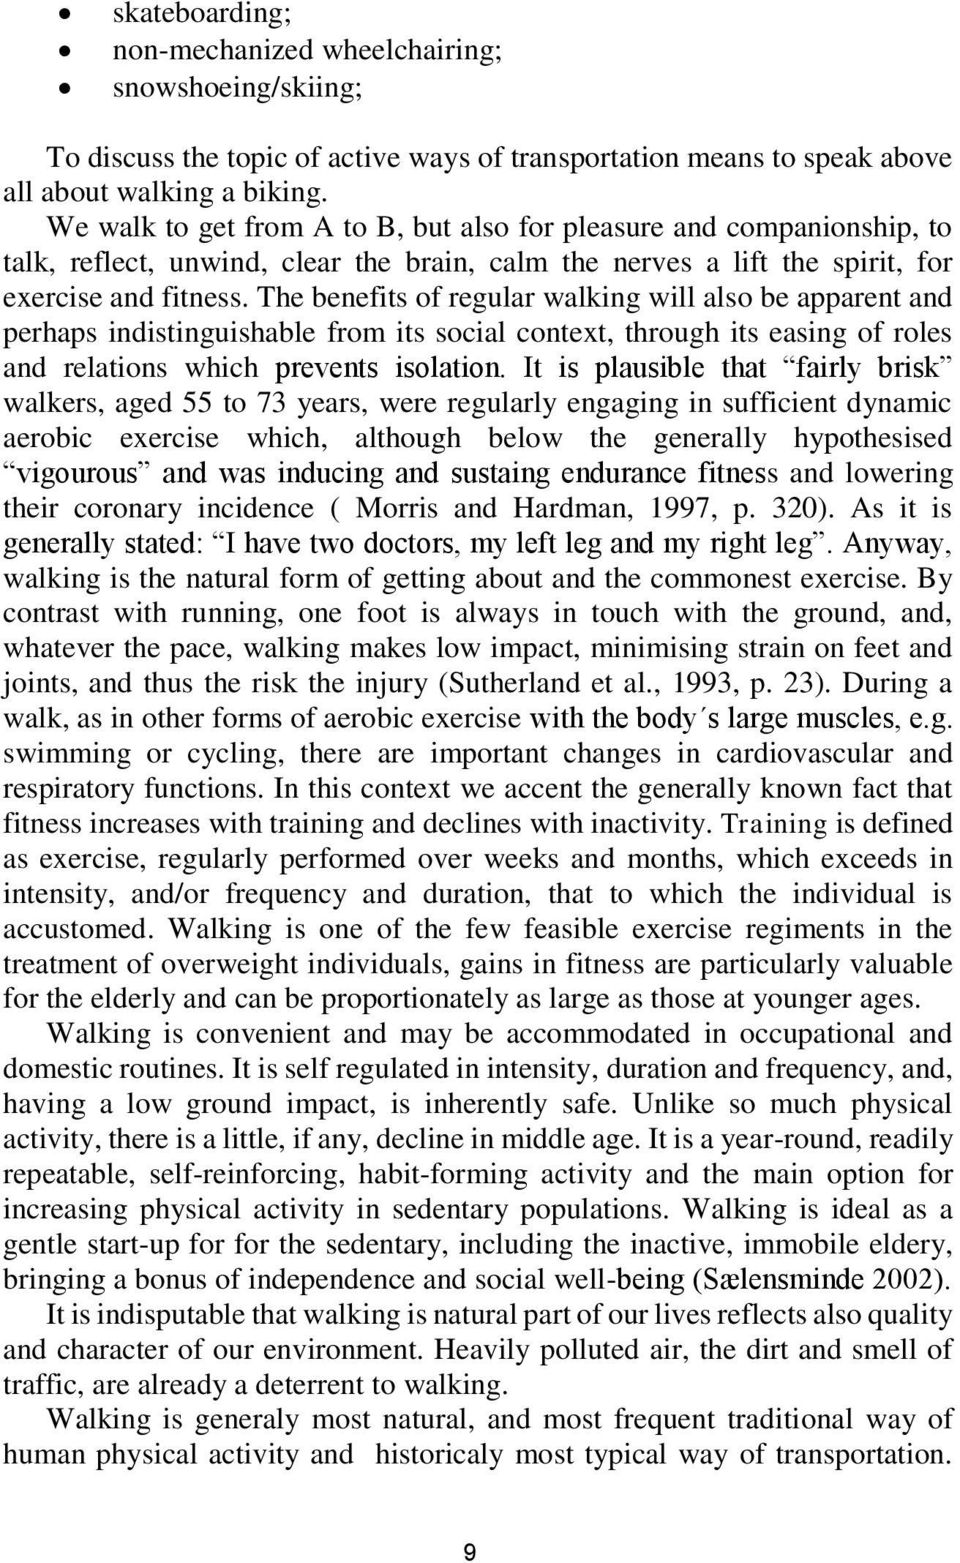 The benefits of regular walking will also be apparent and perhaps indistinguishable from its social context, through its easing of roles and relations which prevents isolation.